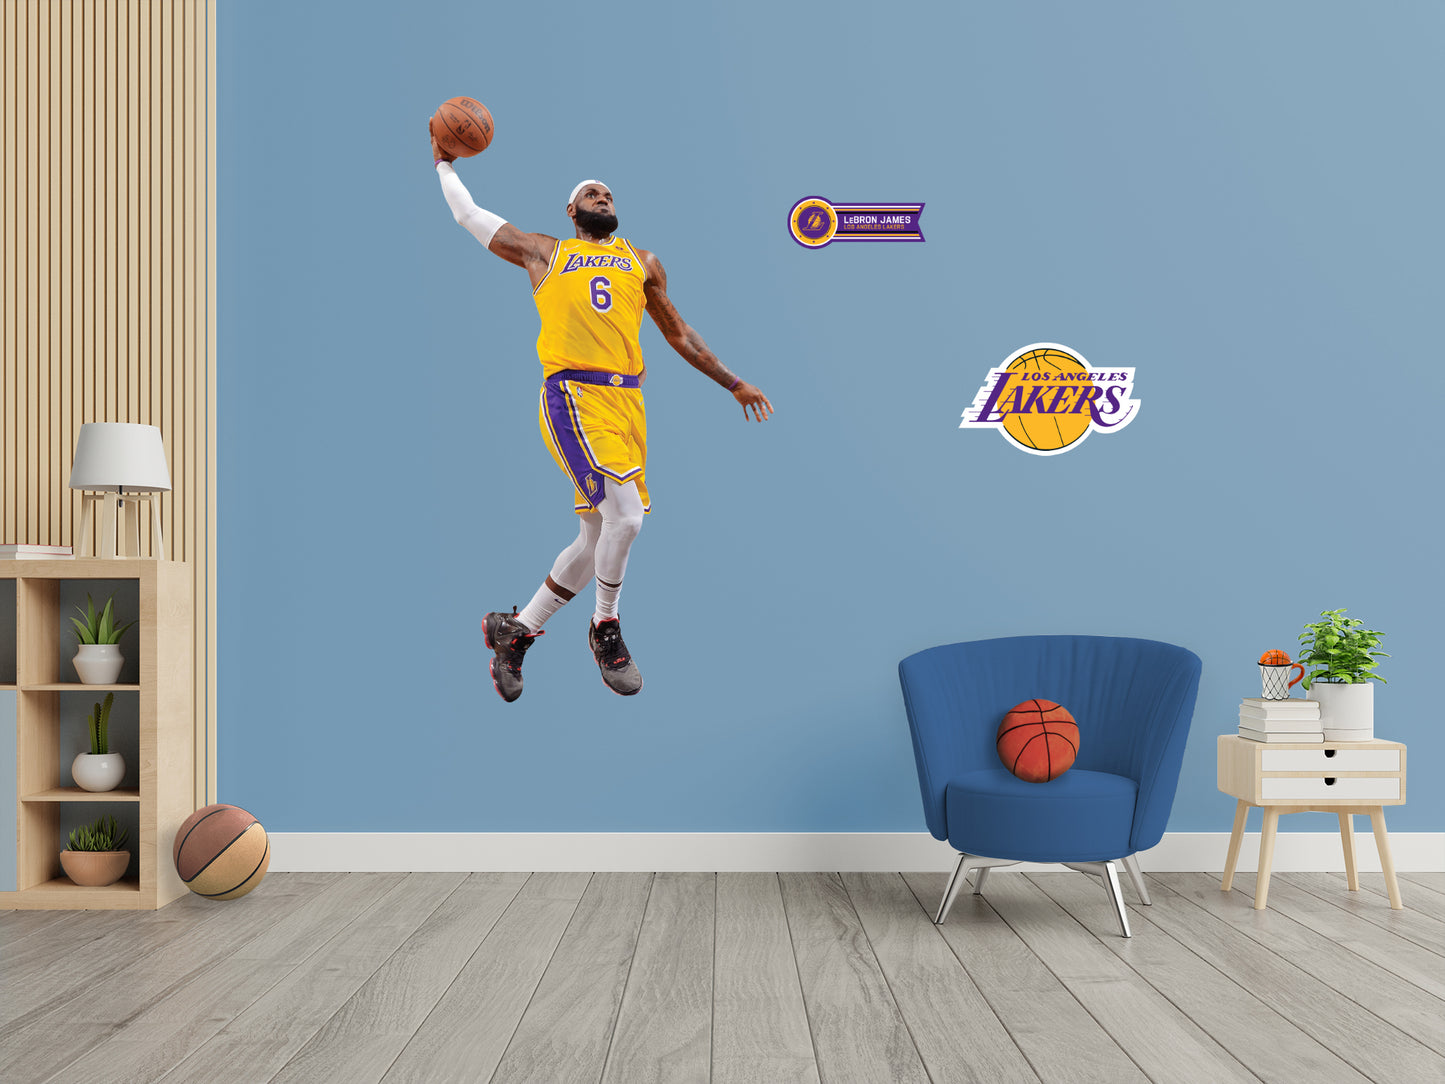 Los Angeles Lakers: LeBron James Dunk - Officially Licensed NBA Removable Adhesive Decal